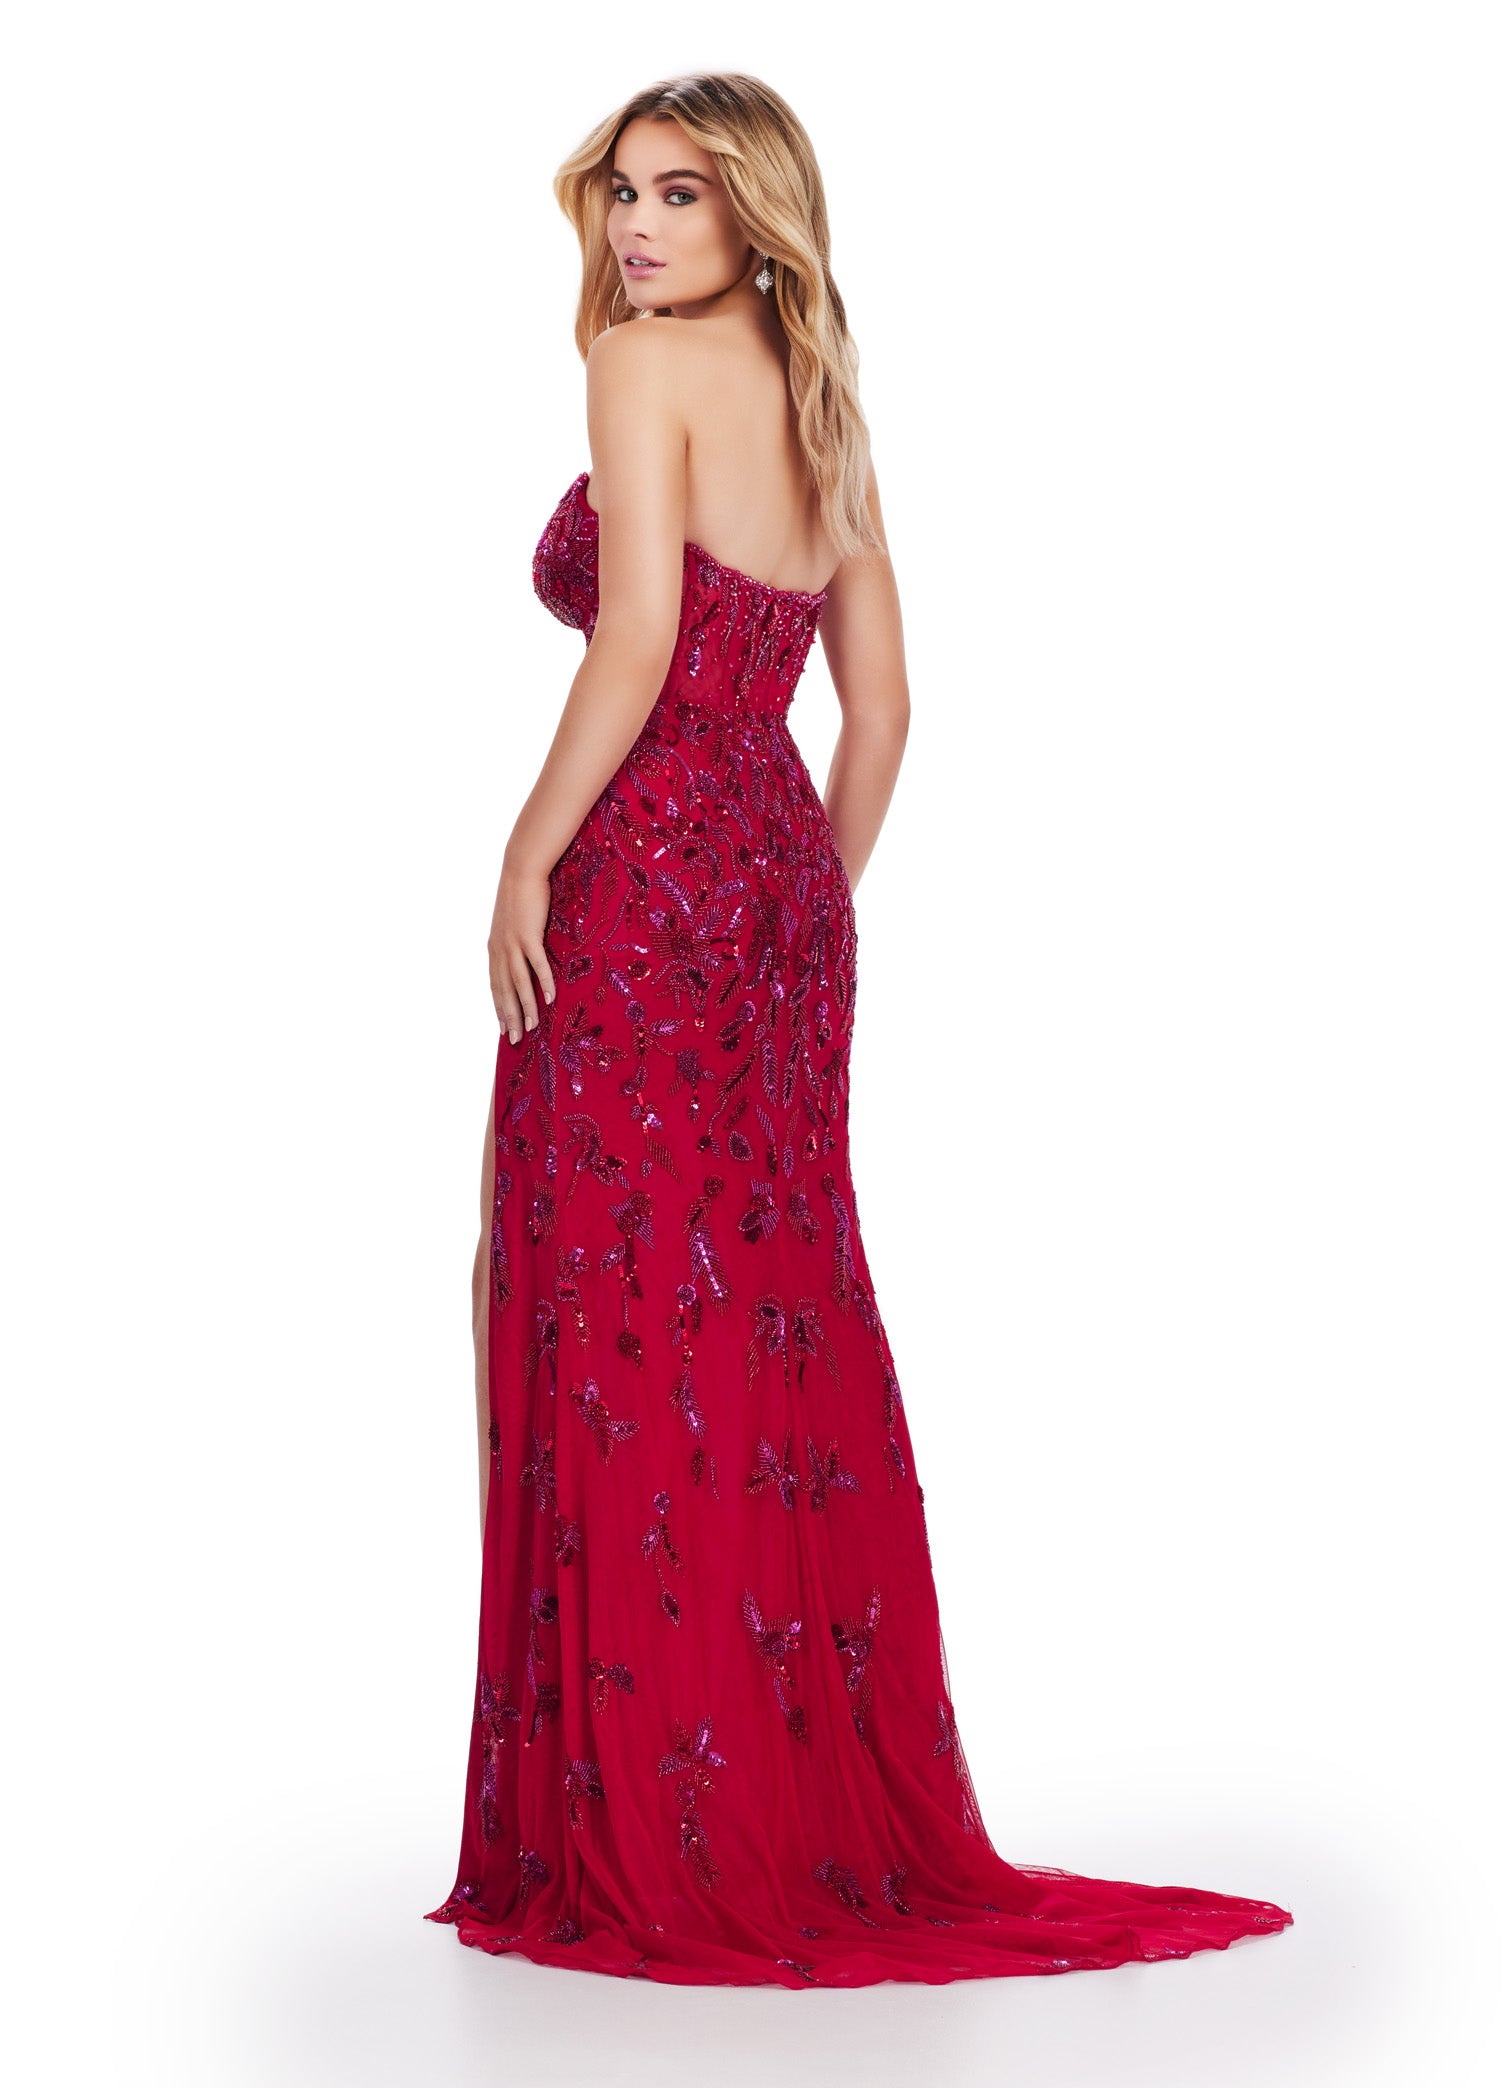 Achieve a stunning look with Ashley Lauren's 11614 Long Prom Dress. The beaded strapless gown features a corset bustier and a slit, adding a touch of elegance to its formal pageant style. Confidently stand out and make a statement at your special occasion. Feel like royalty in this elegant gown. This fully beaded design features an illusion corset bustier. The beading flows throughout the gown, which has a left leg slit.